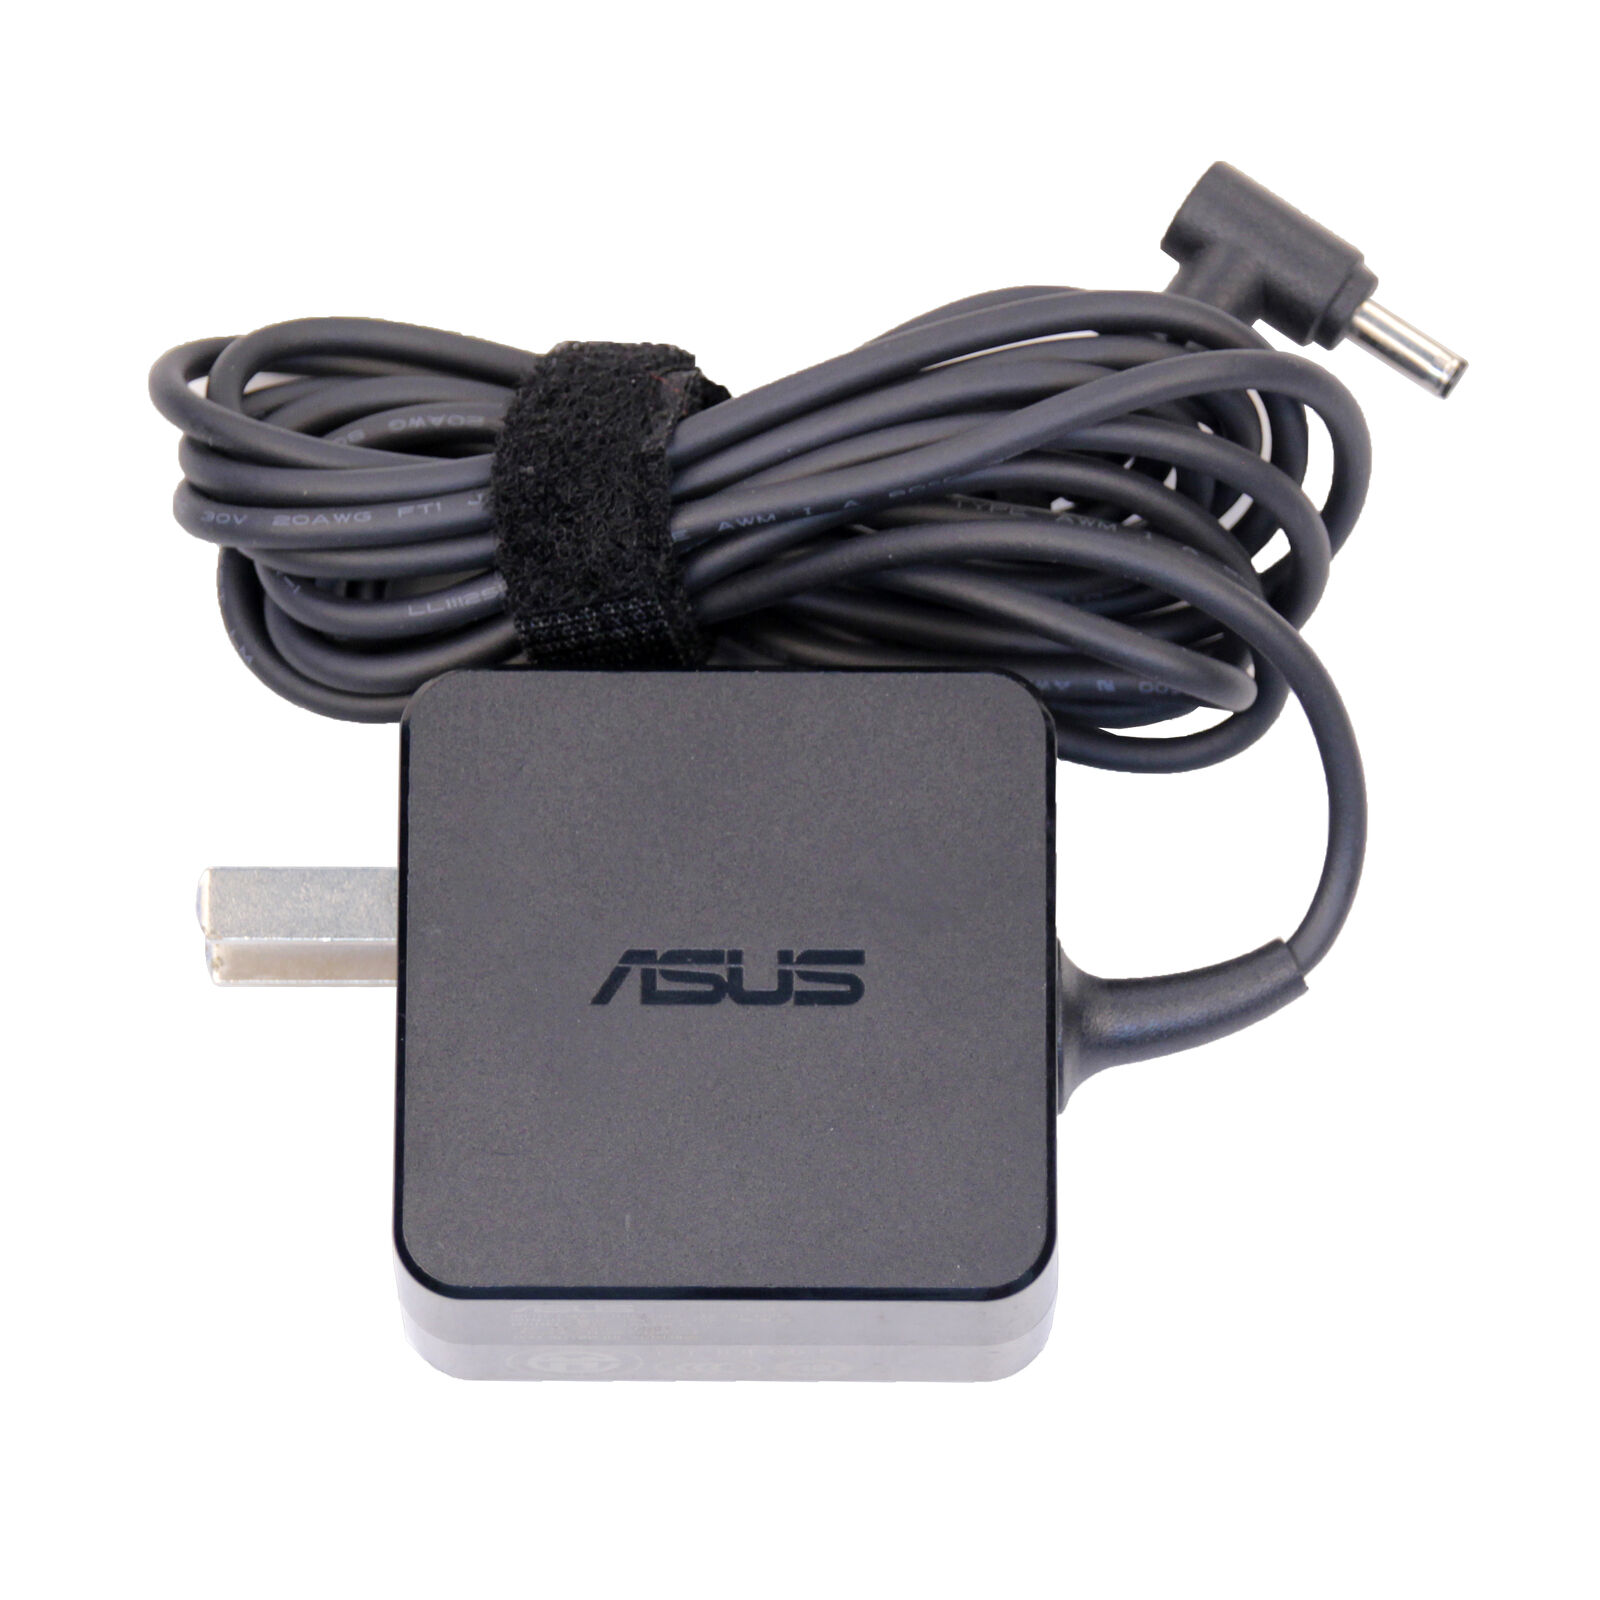 ASUS W19-045N3A 19V 2.37A 45W Genuine Original AC Power Adapter Charger